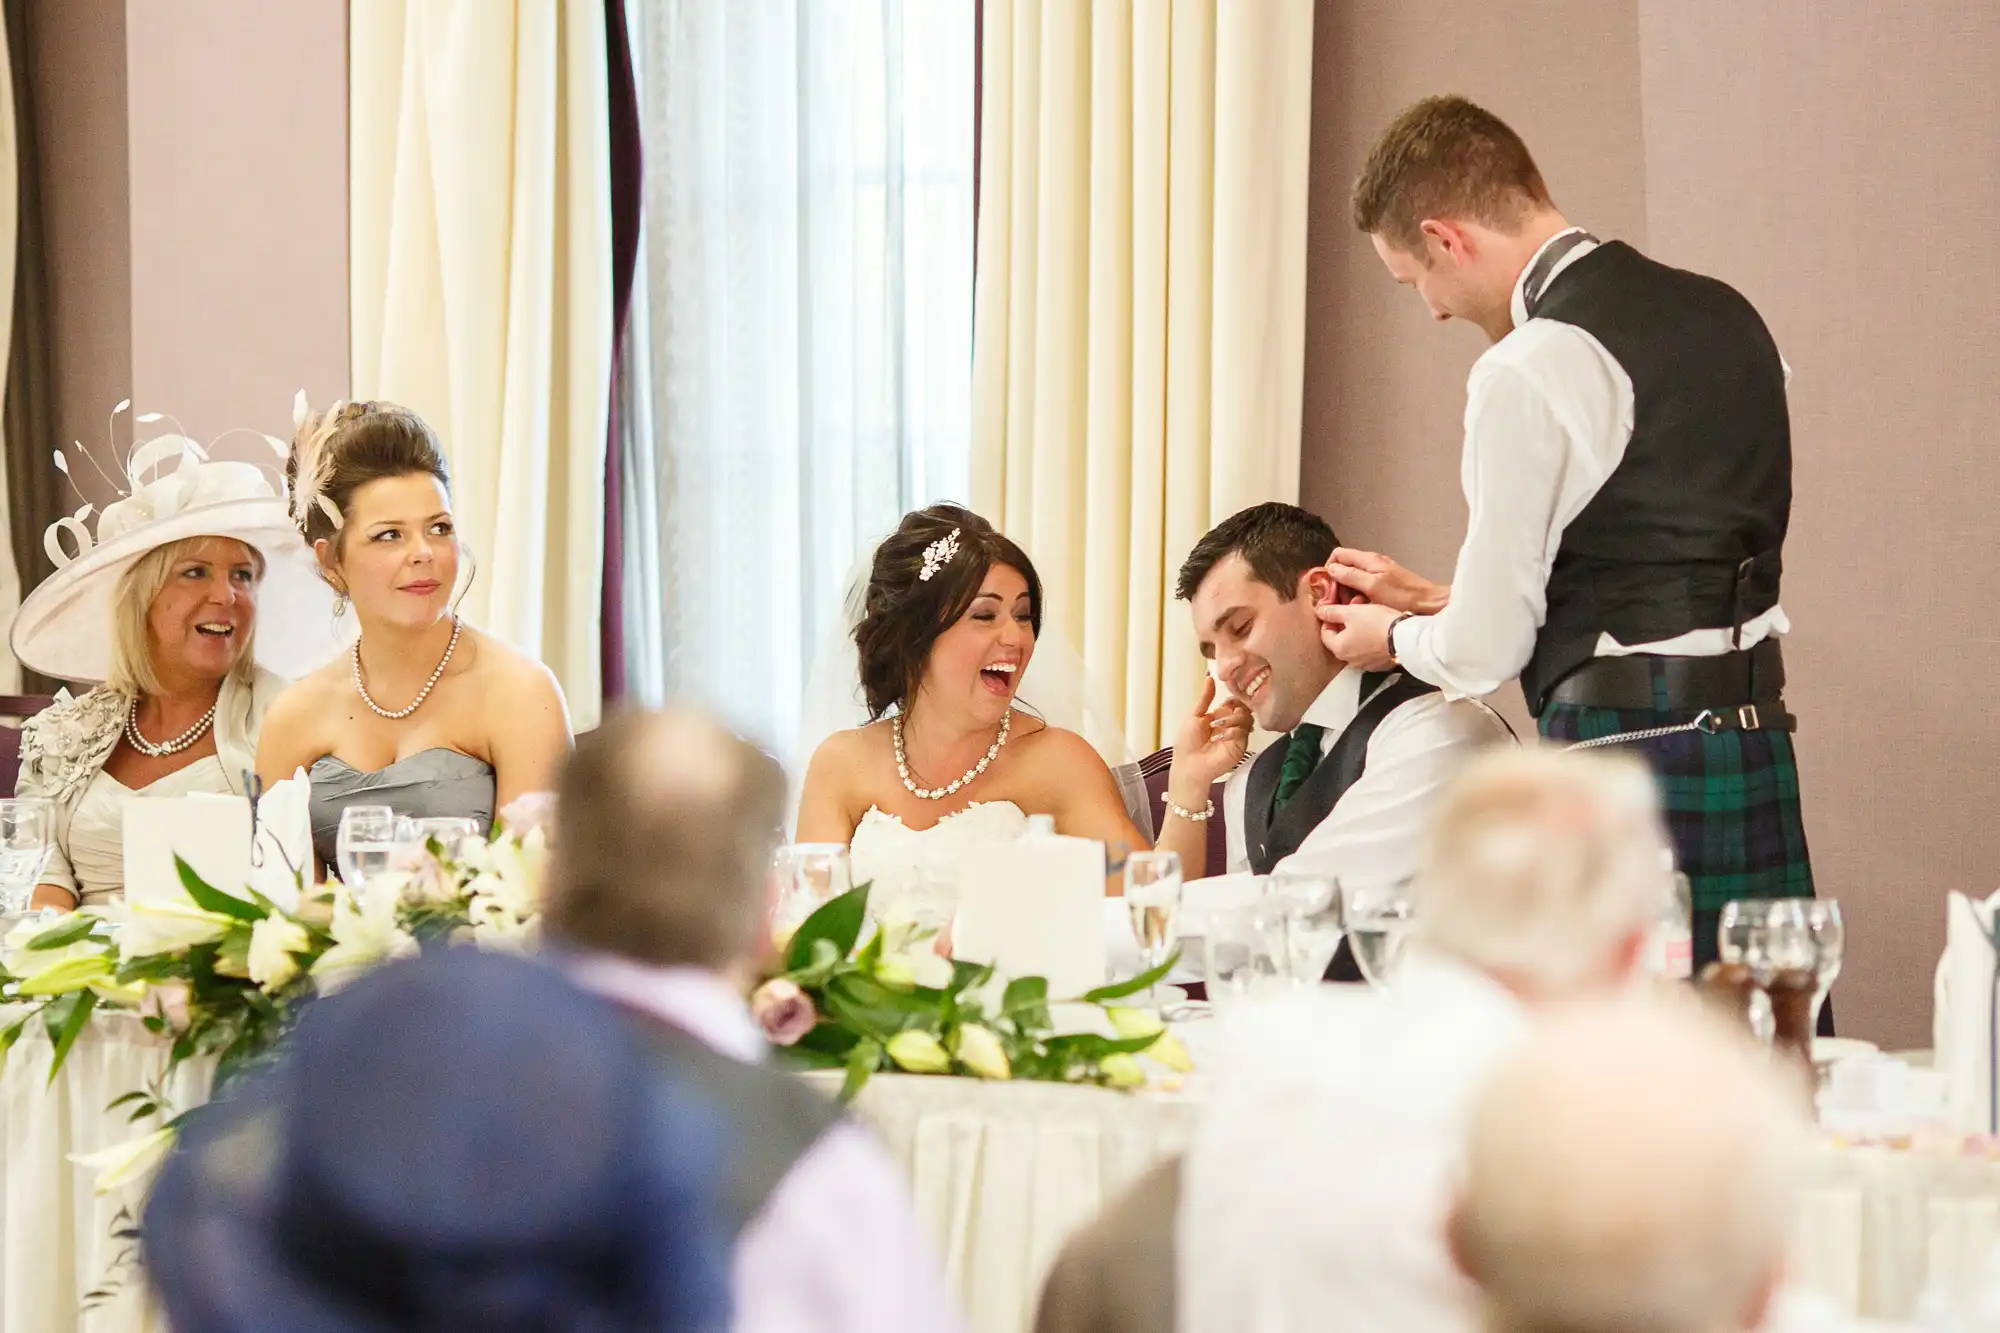 A wedding reception scene with guests dressed in formal wear, including kilts, laughing and interacting around a table.